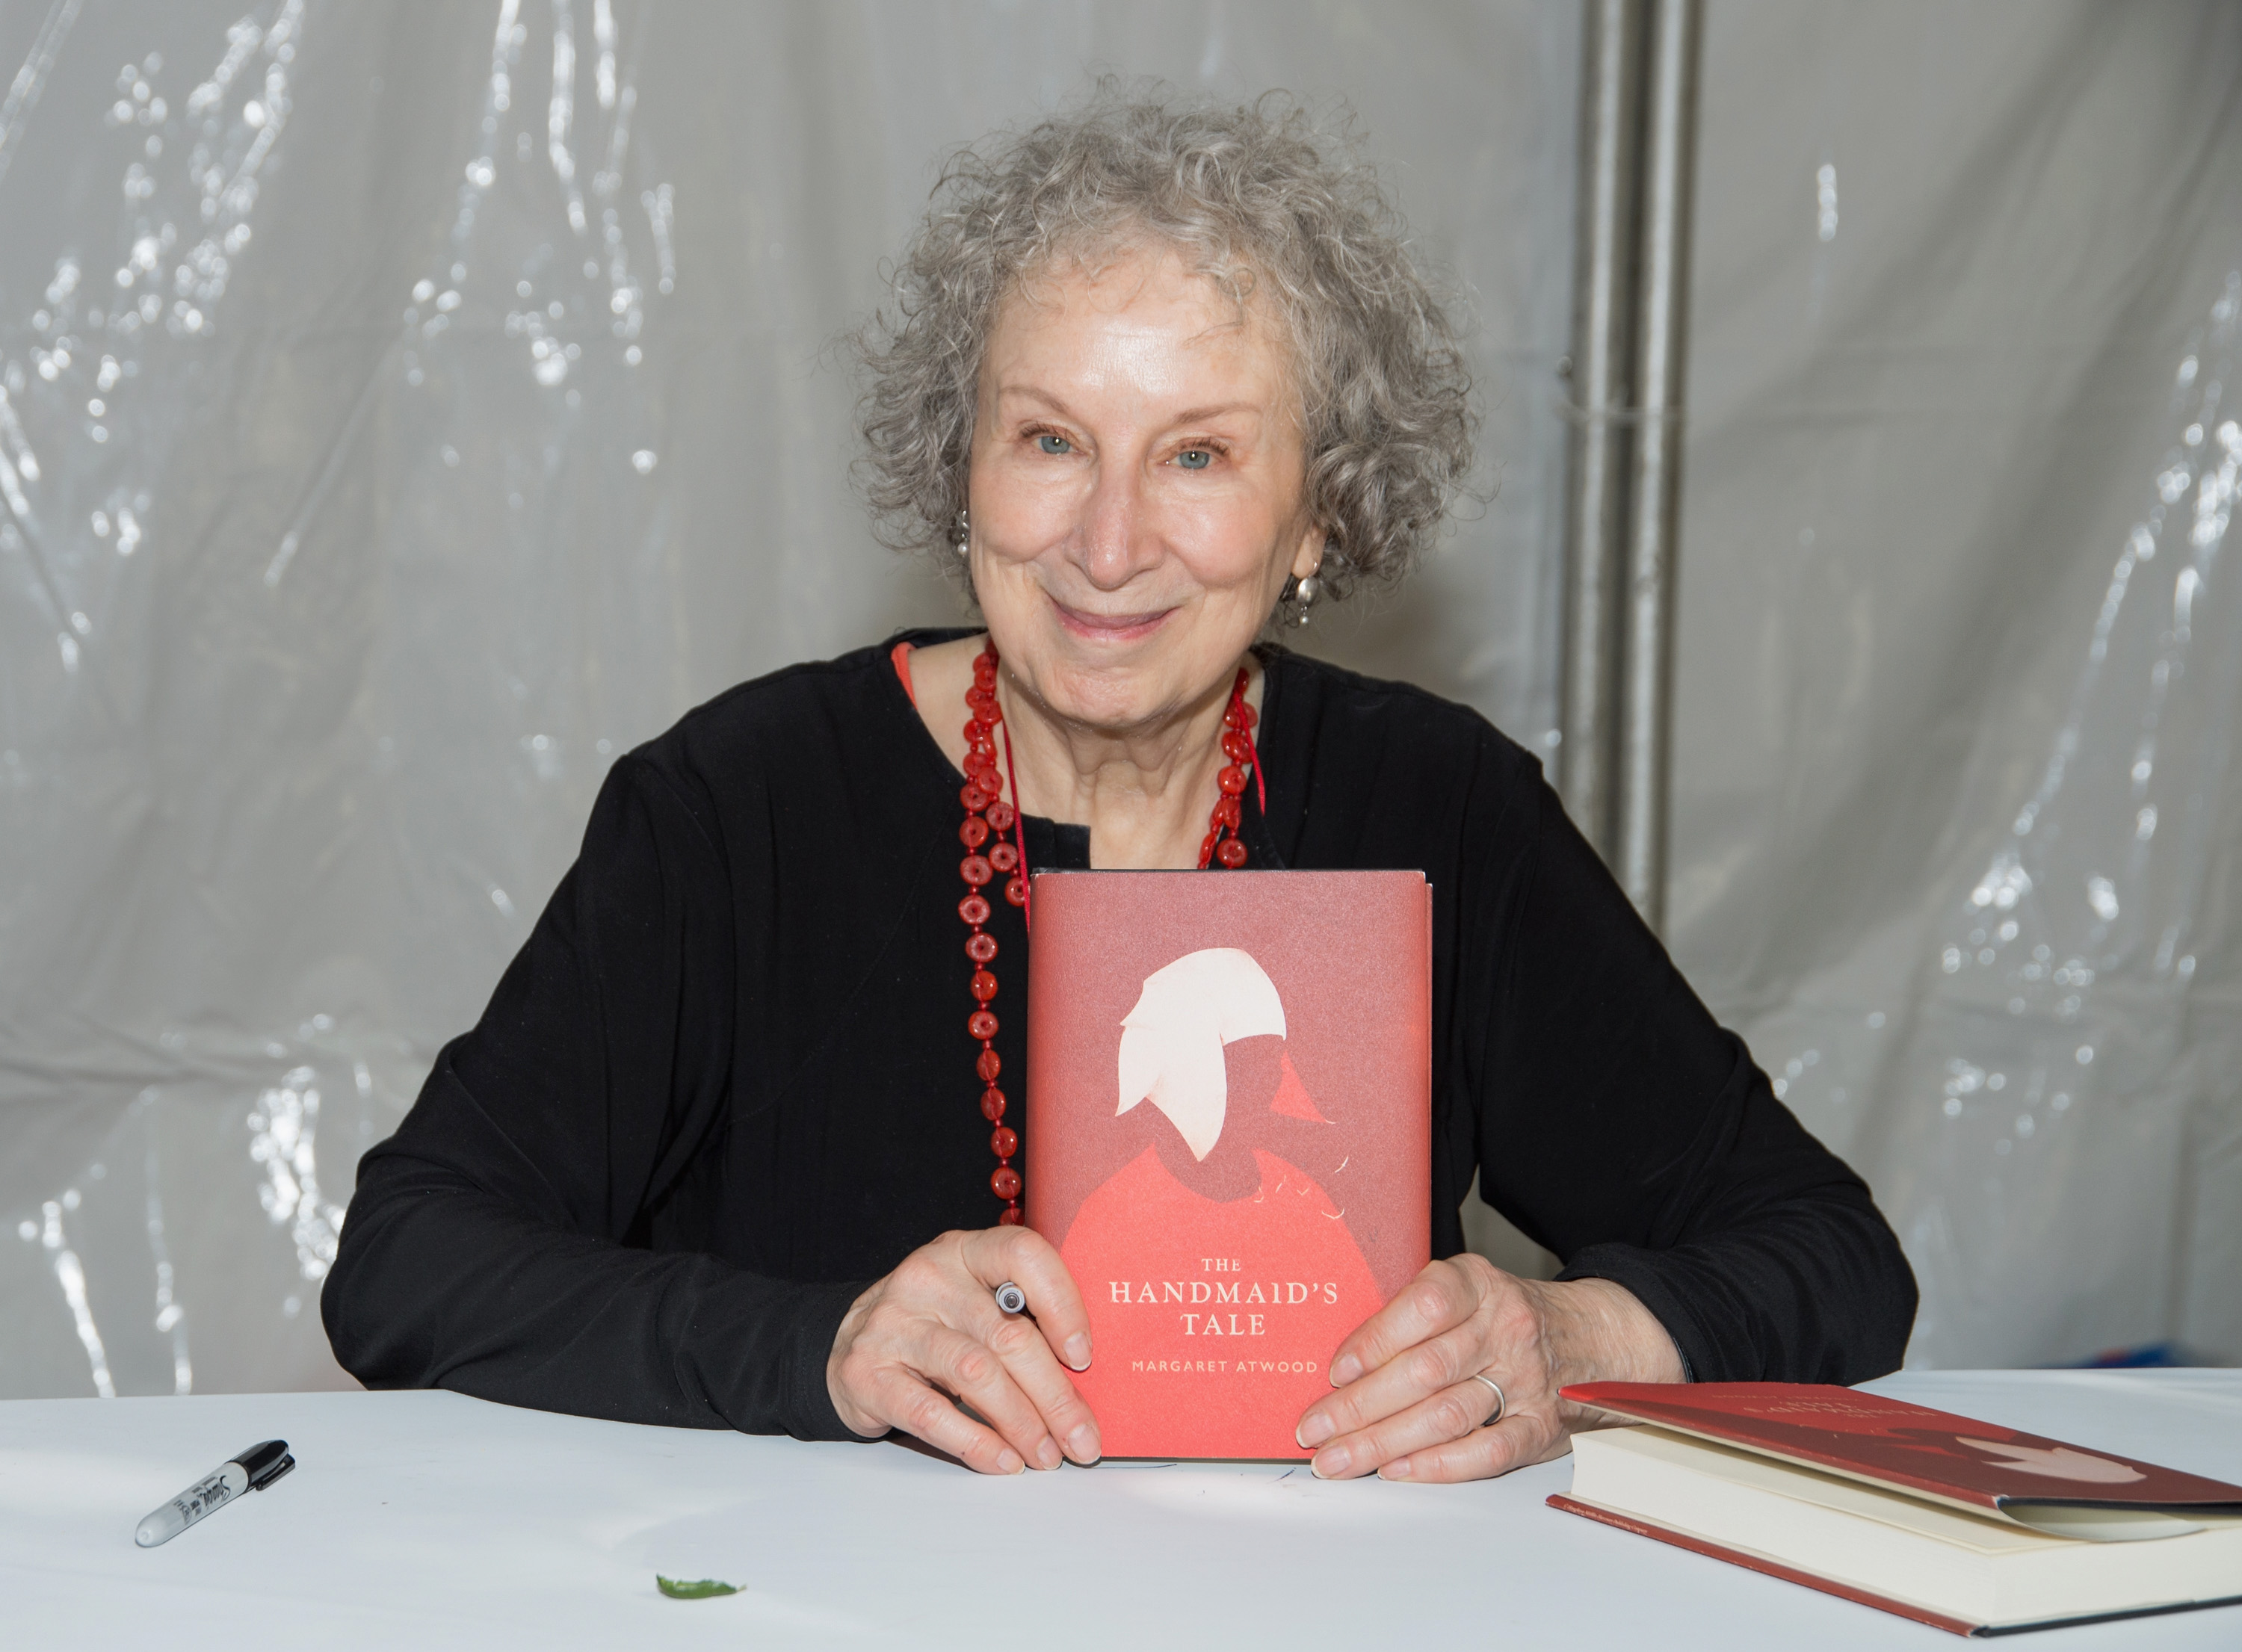 Author Margaret Atwood with a copy of The Handmaid's Tale